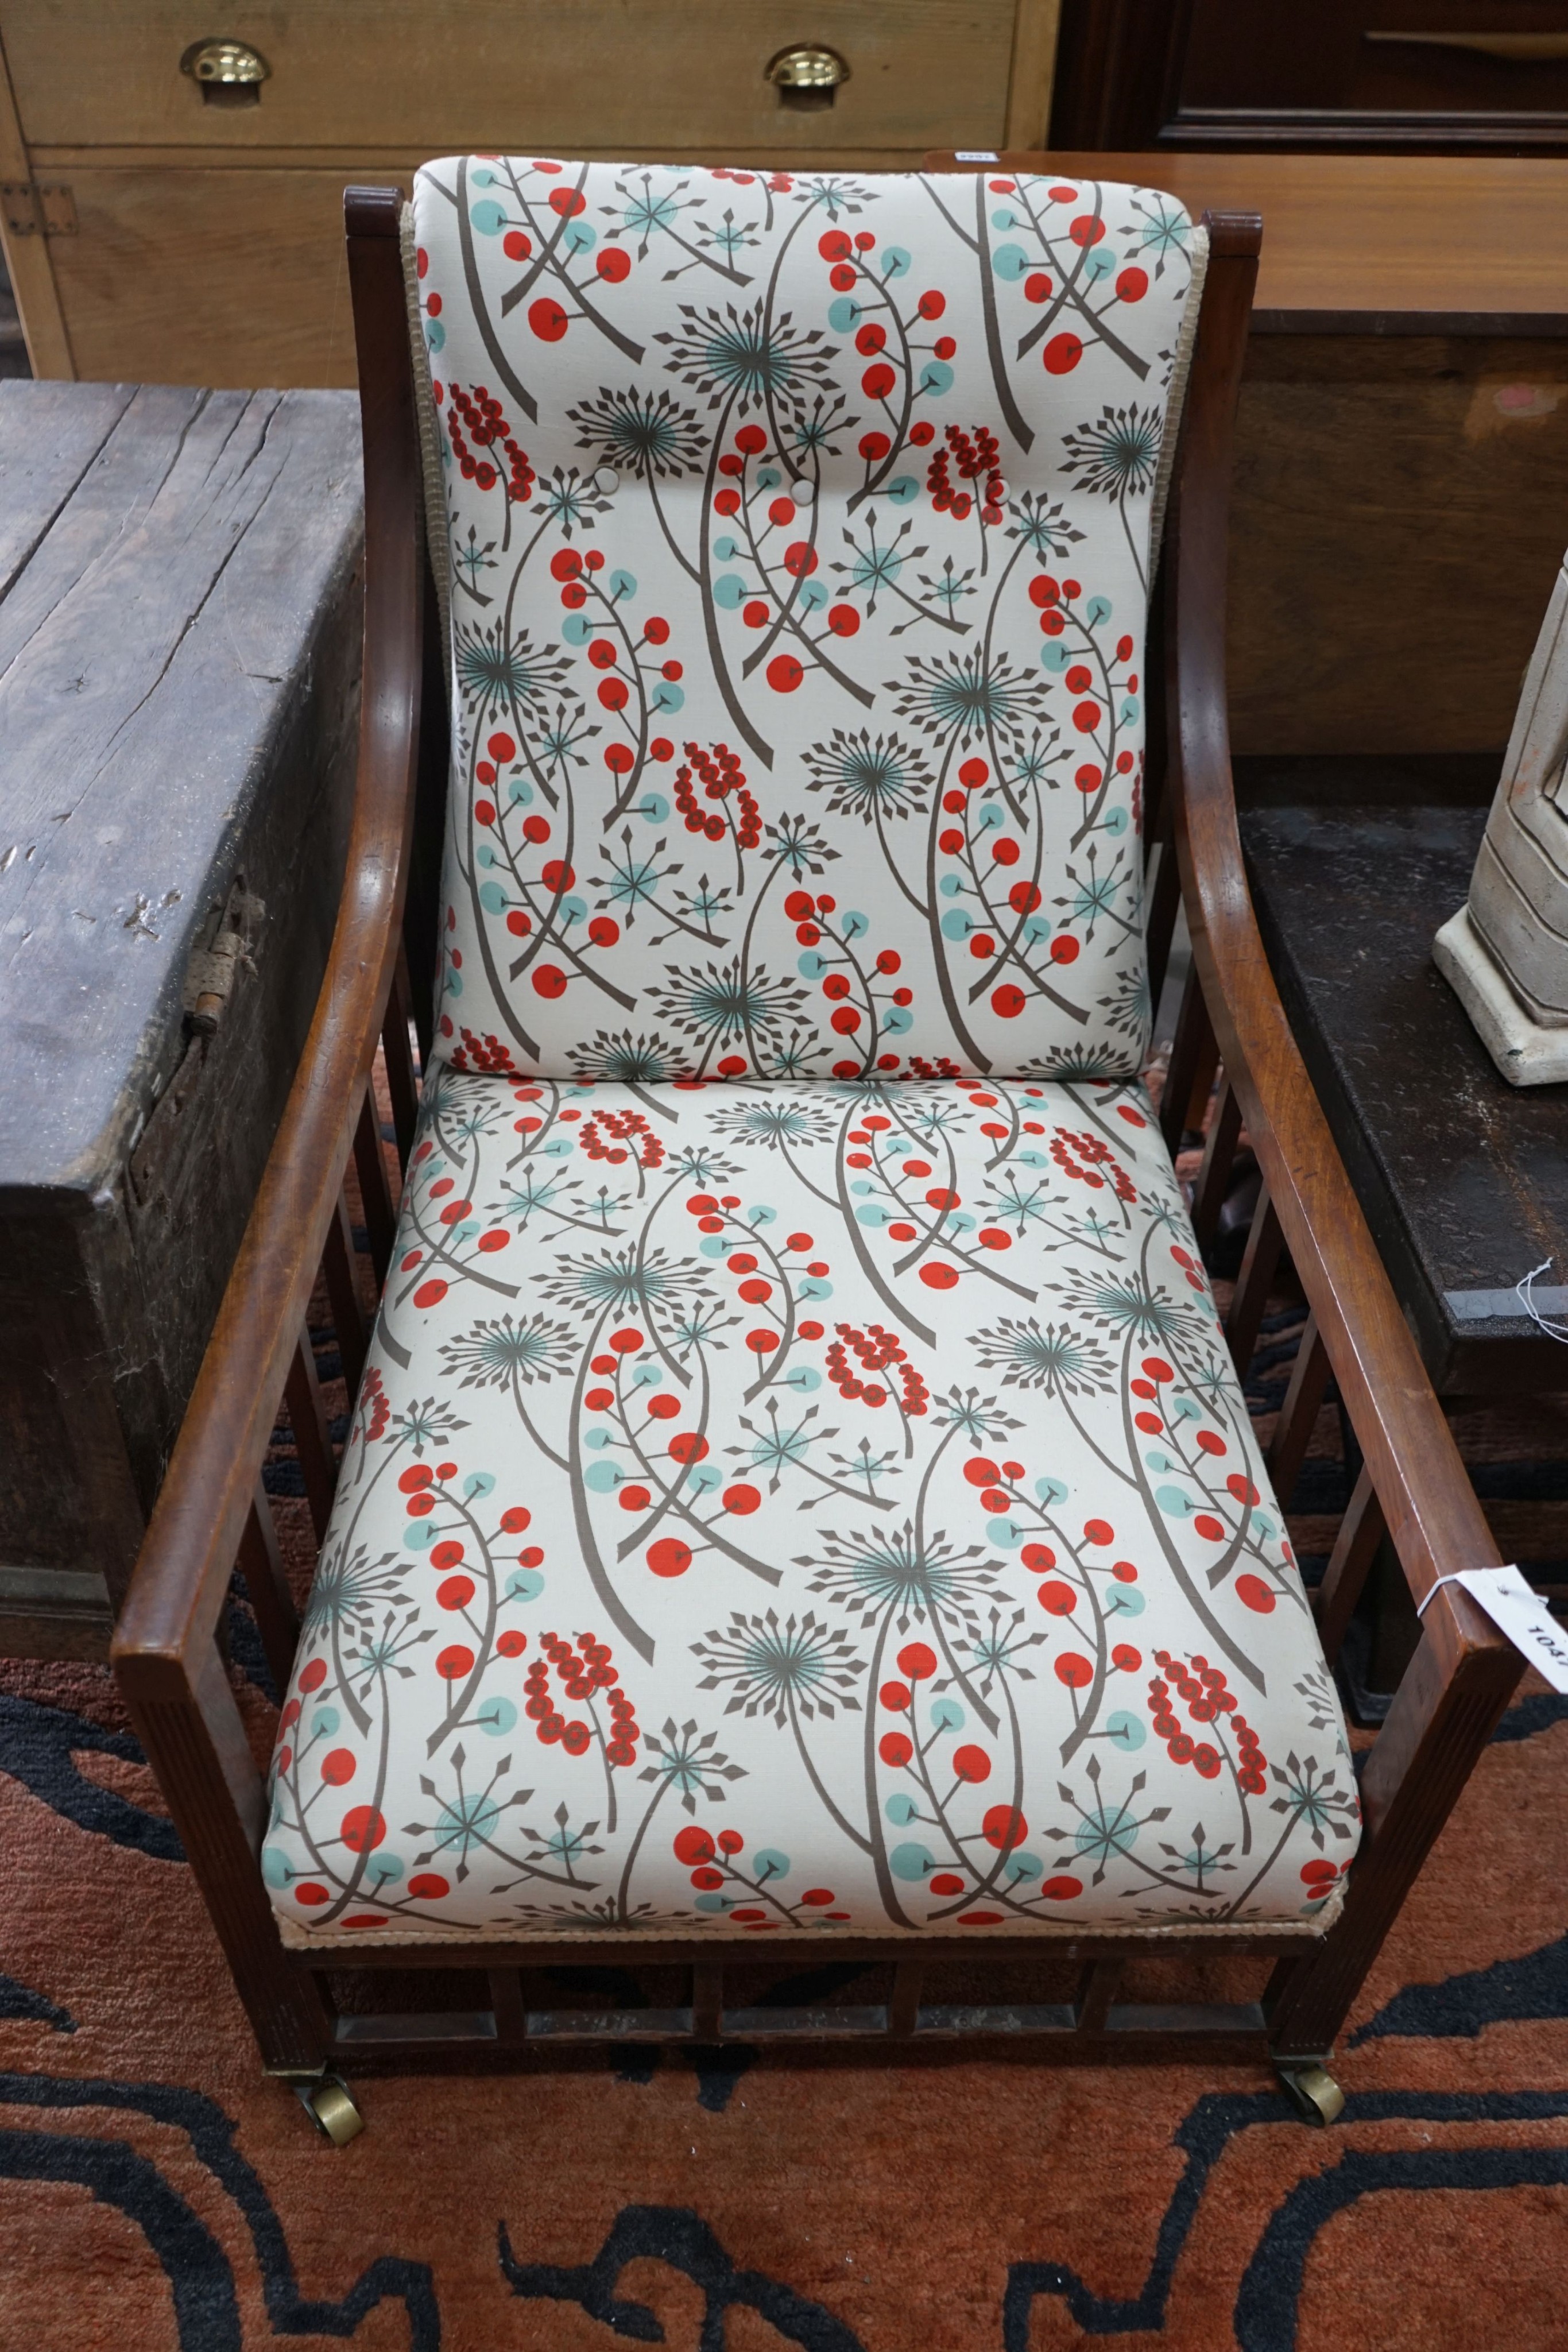 An Arts and Crafts mahogany armchair, recently re-upholstered, width 60cm, depth 82cm, height 82cm